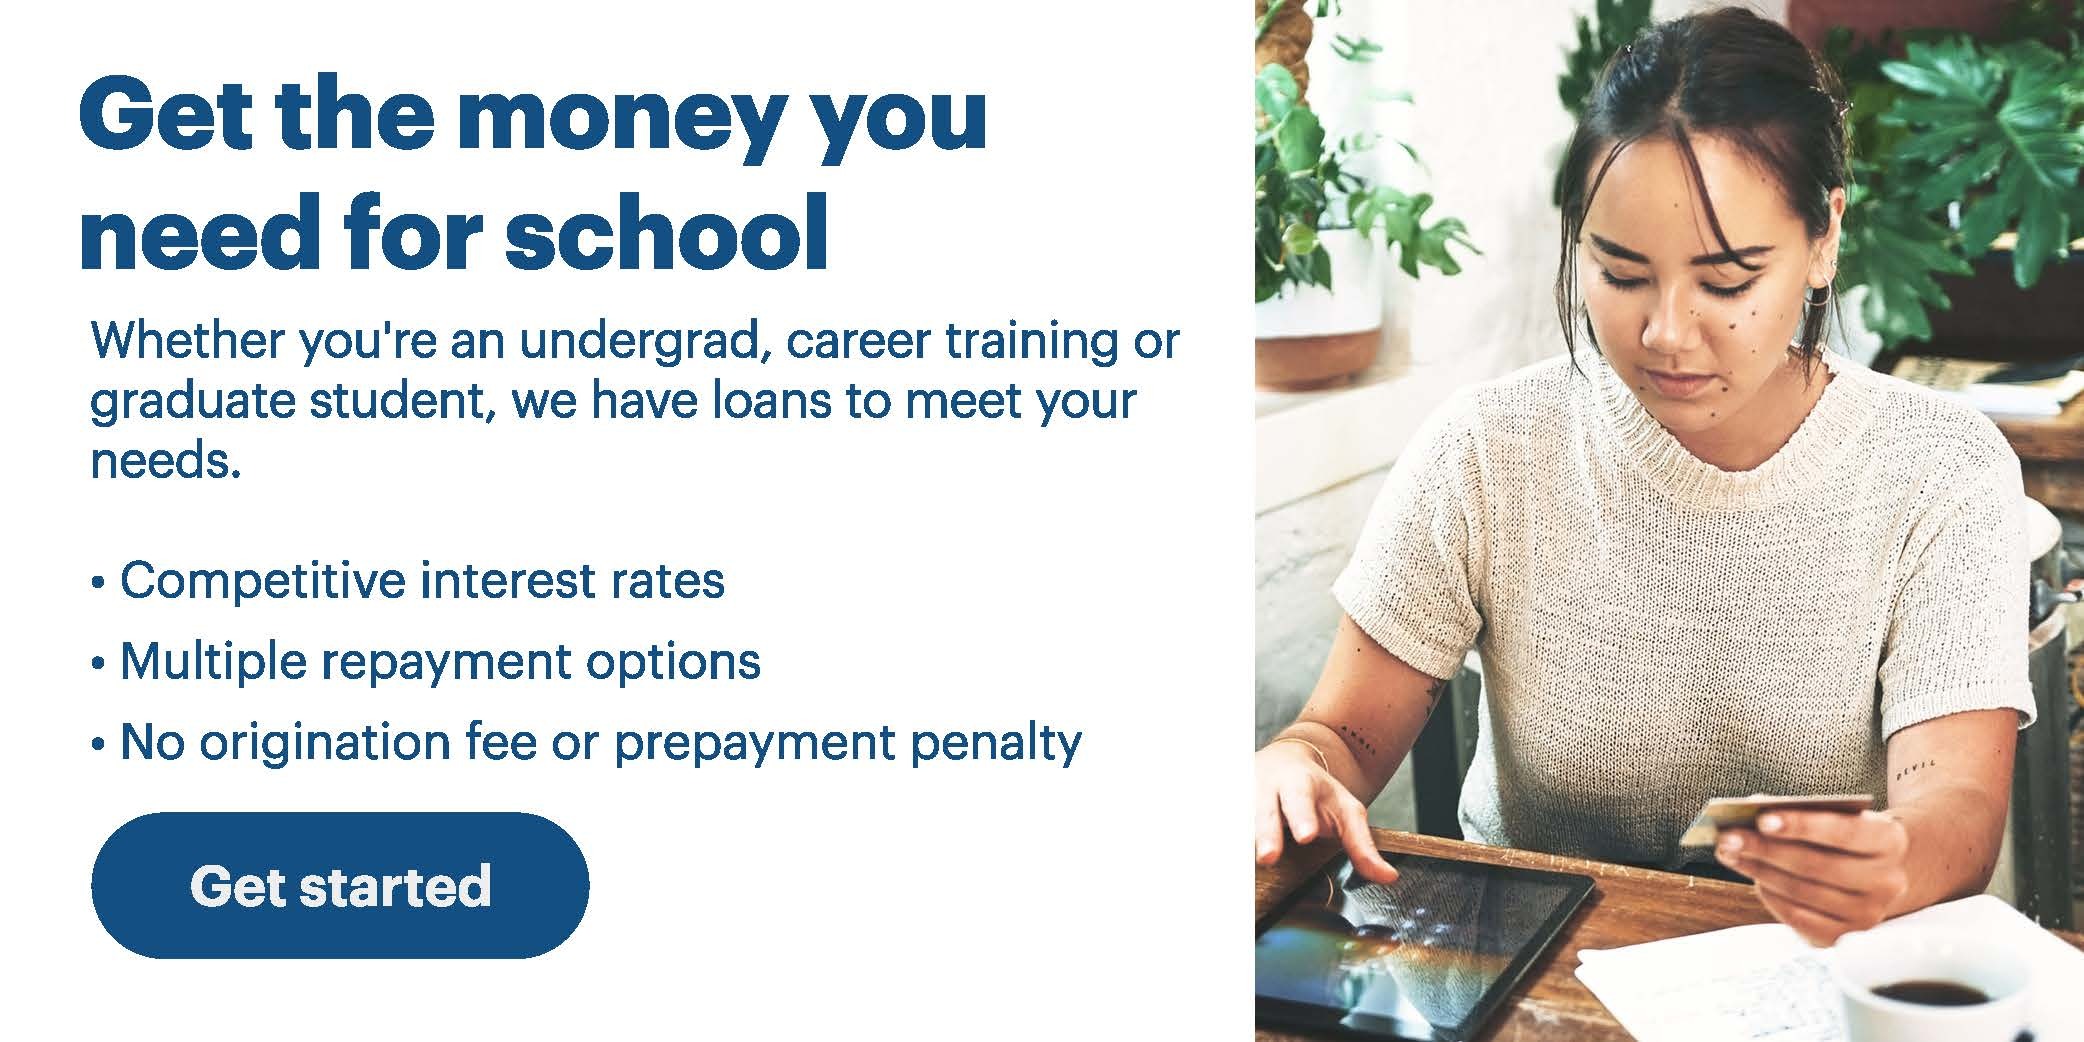 Mobile Private Student Loans by SallieMae for University of Mobile Students in Mobile, AL